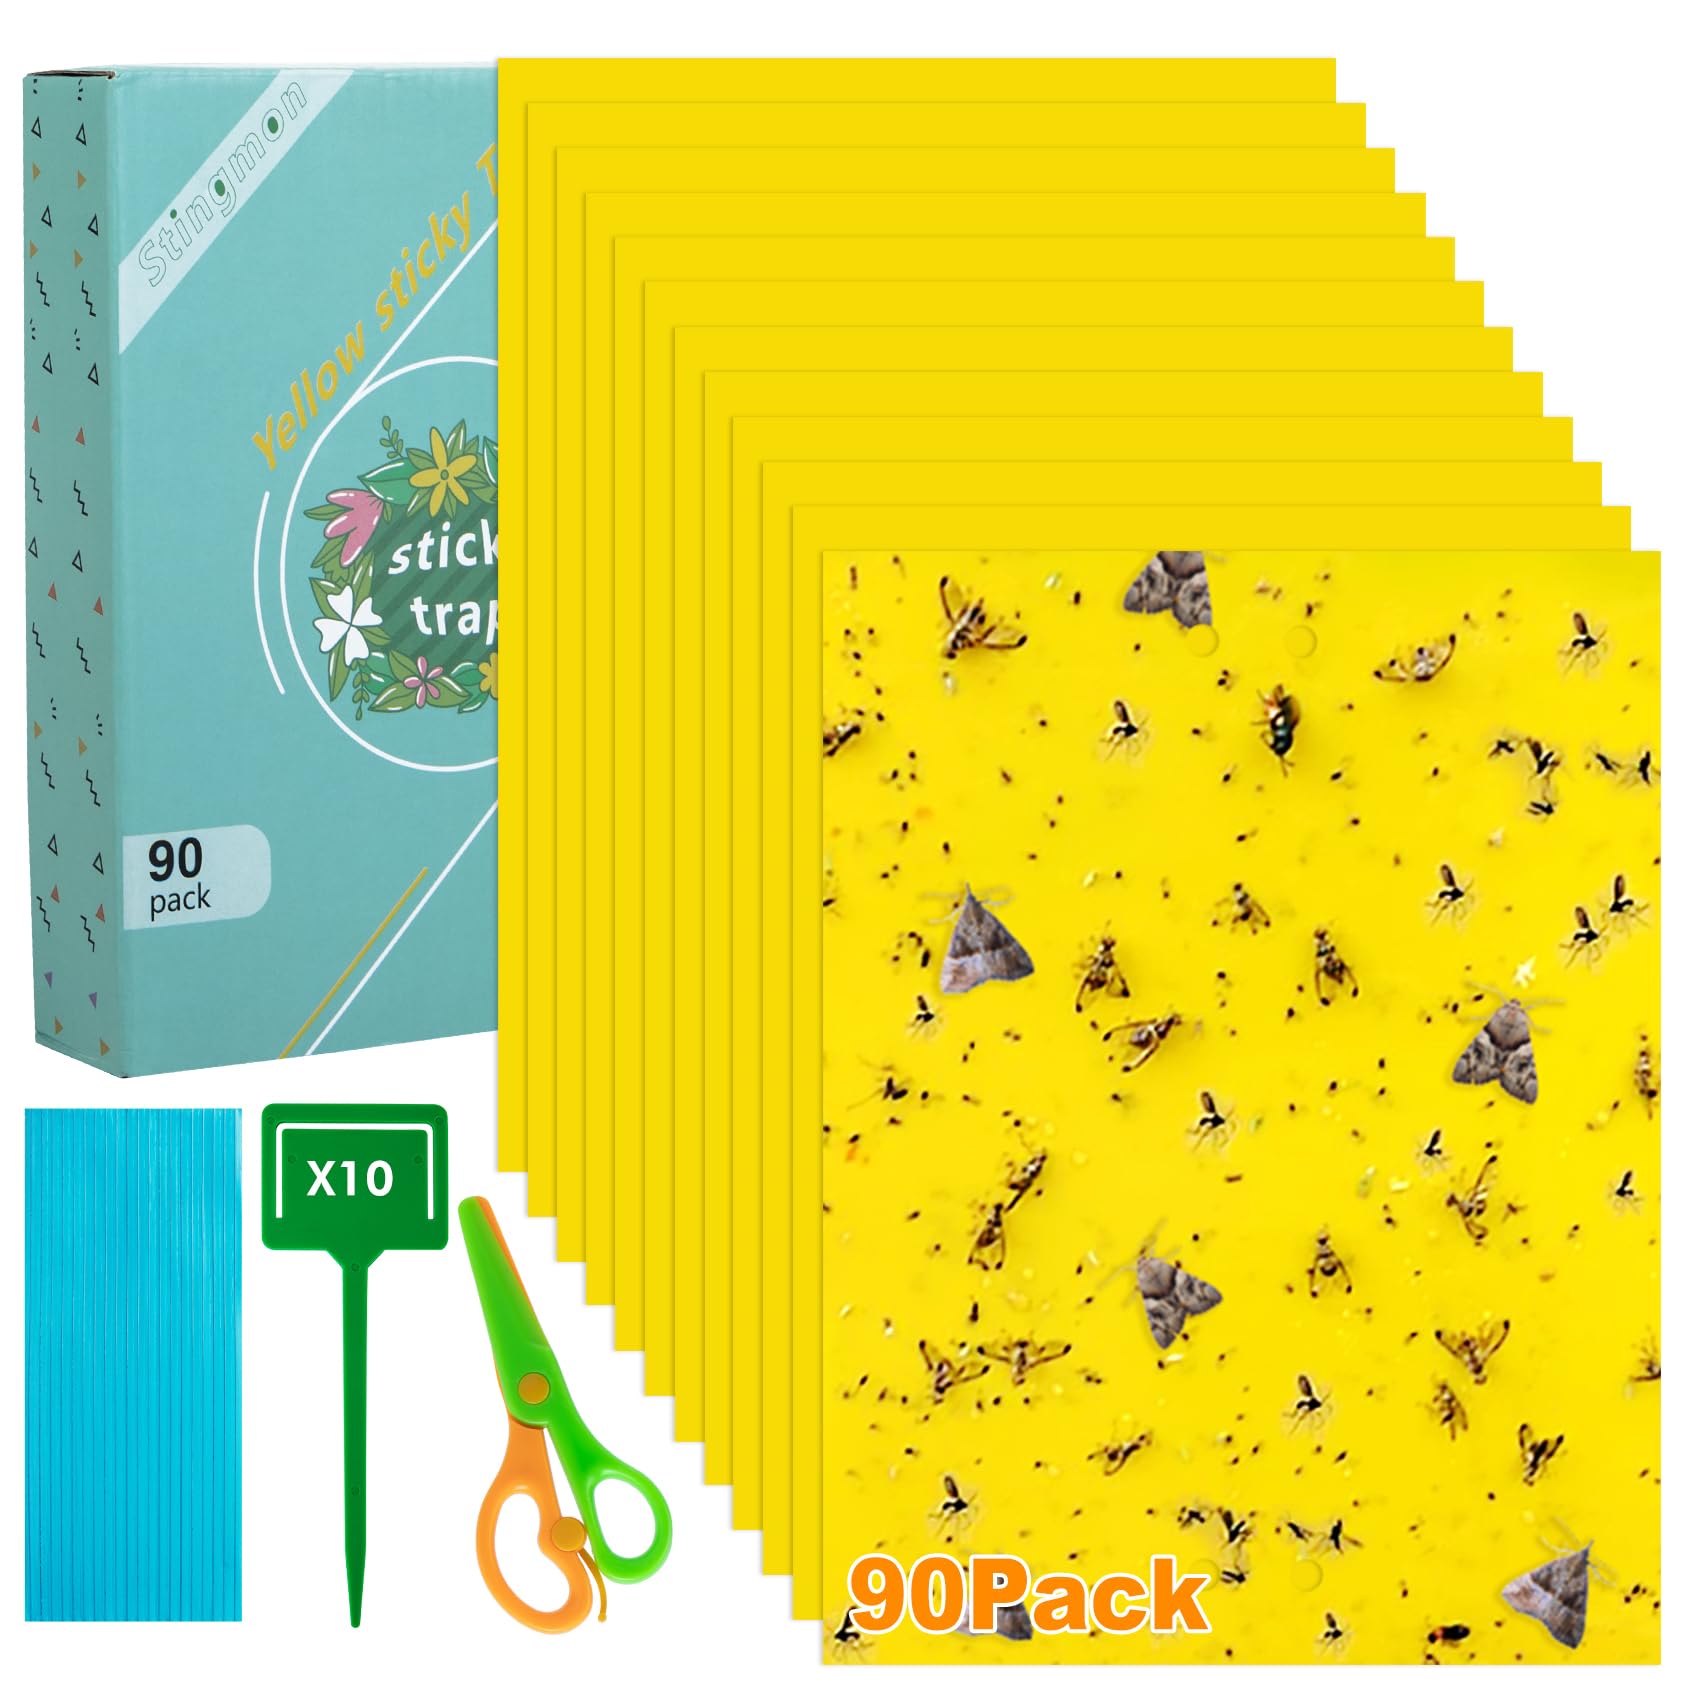 90 Pcs Sticky Fly Trap, Yellow Fly Catcher for Orchard Garden, Fungus Gnat Killer Outdoor for Fungus Gnats, Whiteflies, Aphids, Leafminers